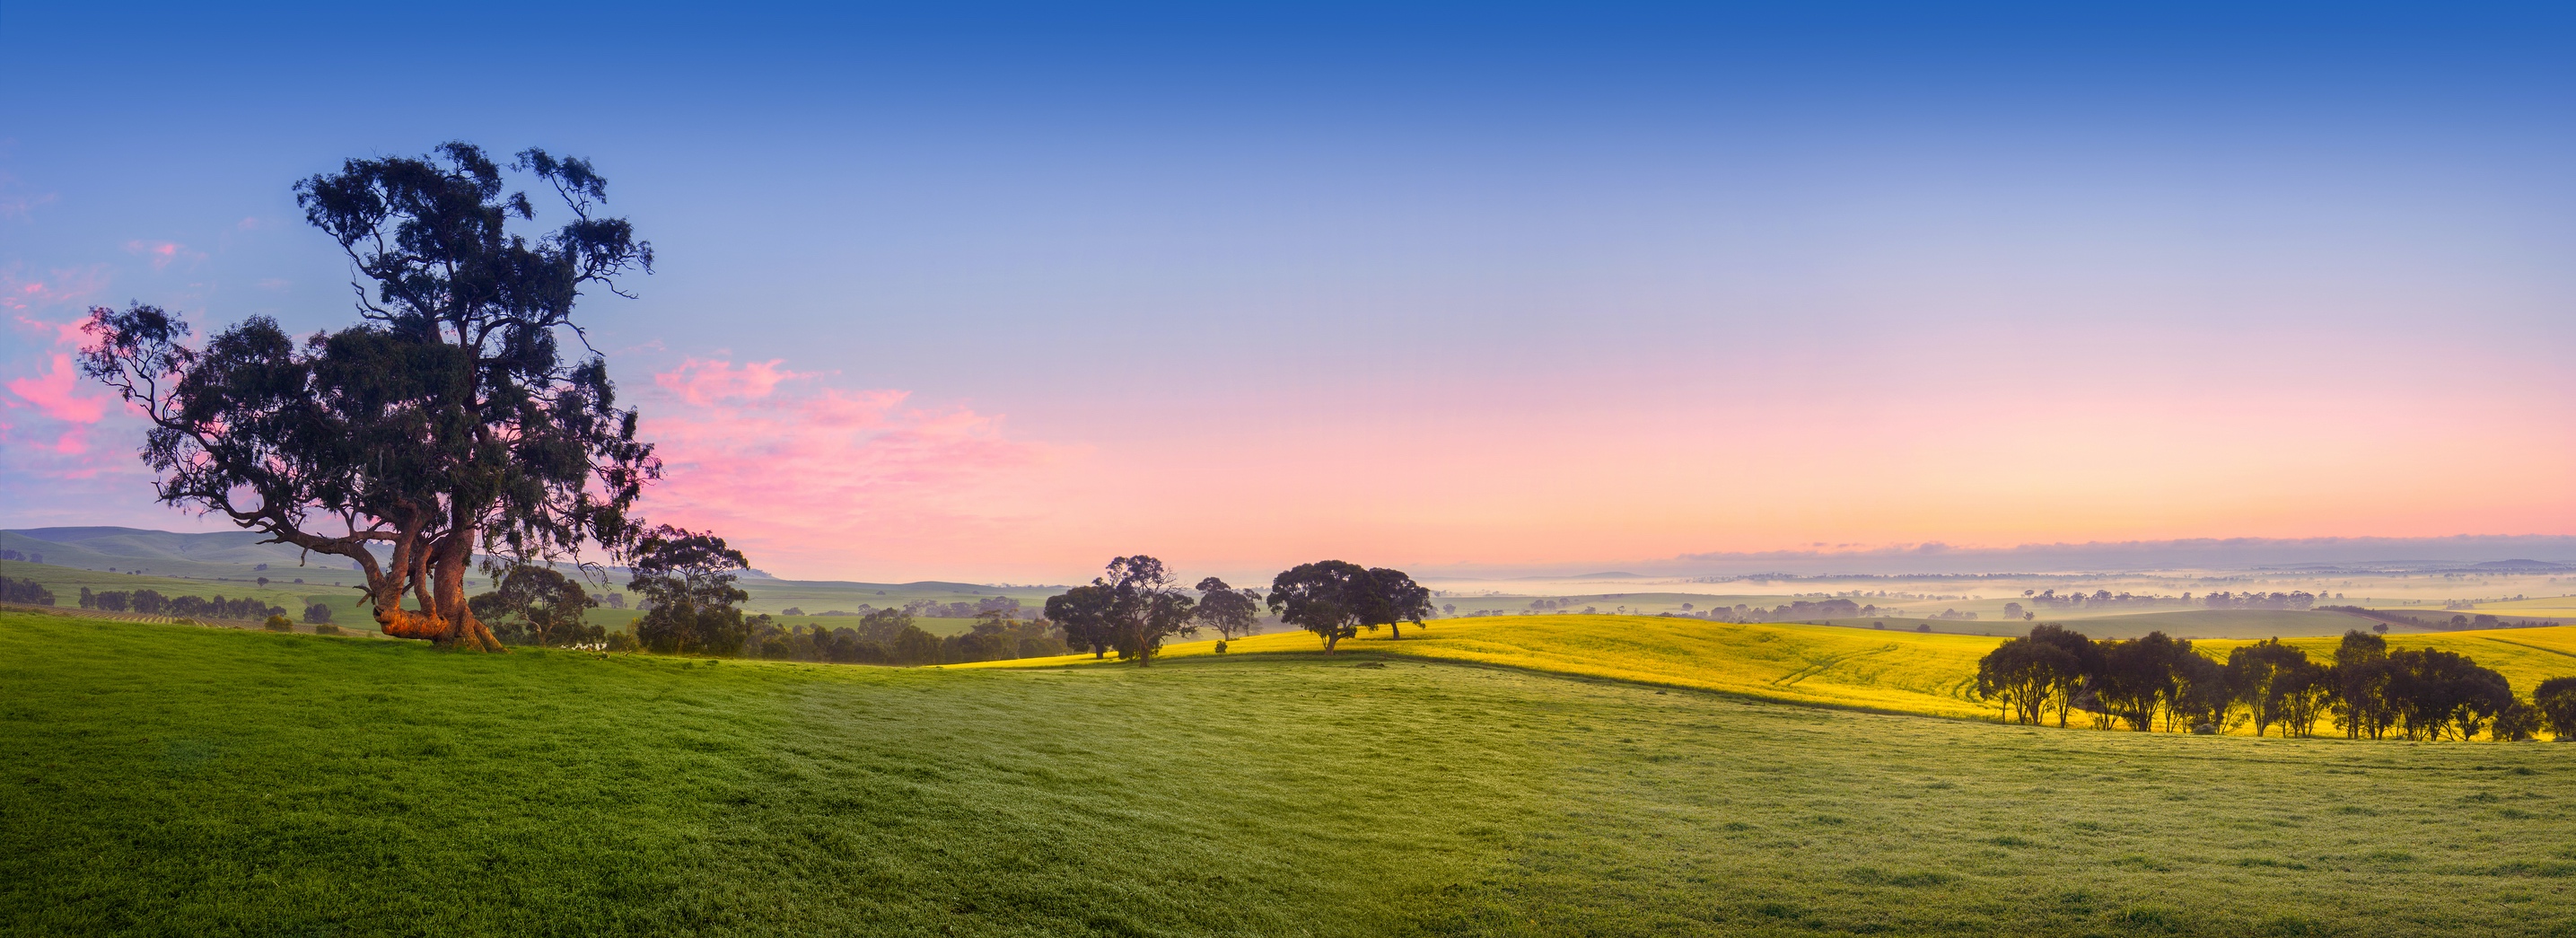 A field in the Clare Valley, South Australia – by Ben Goode